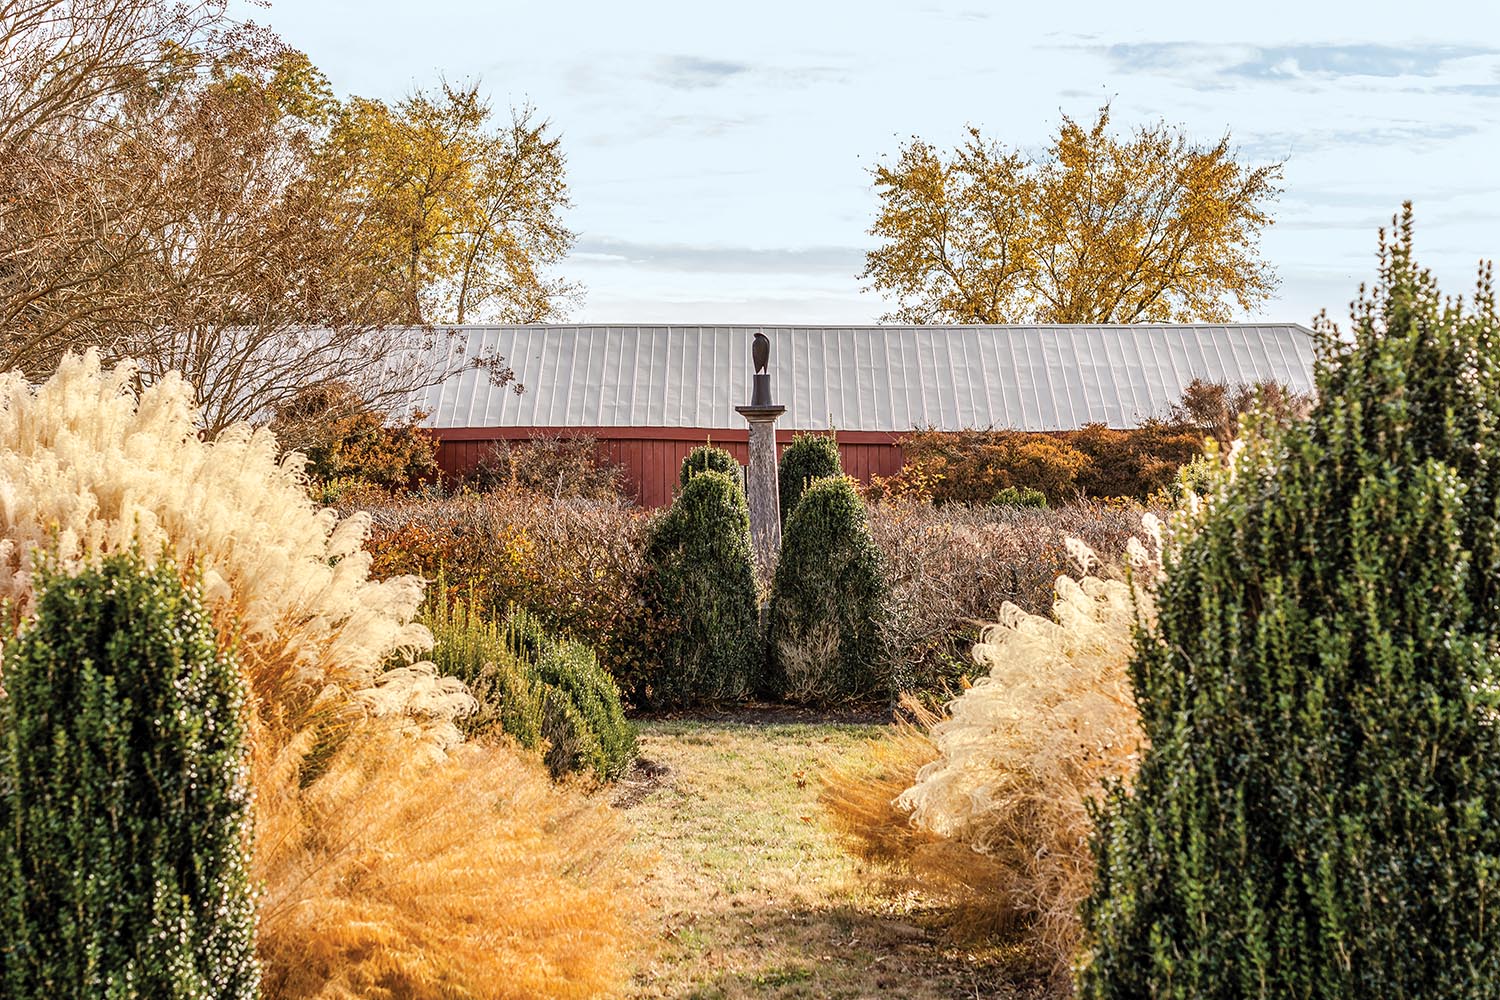 Green and gold grasses fill up a garden with a metal hawk statue and the backdrop of a red barn